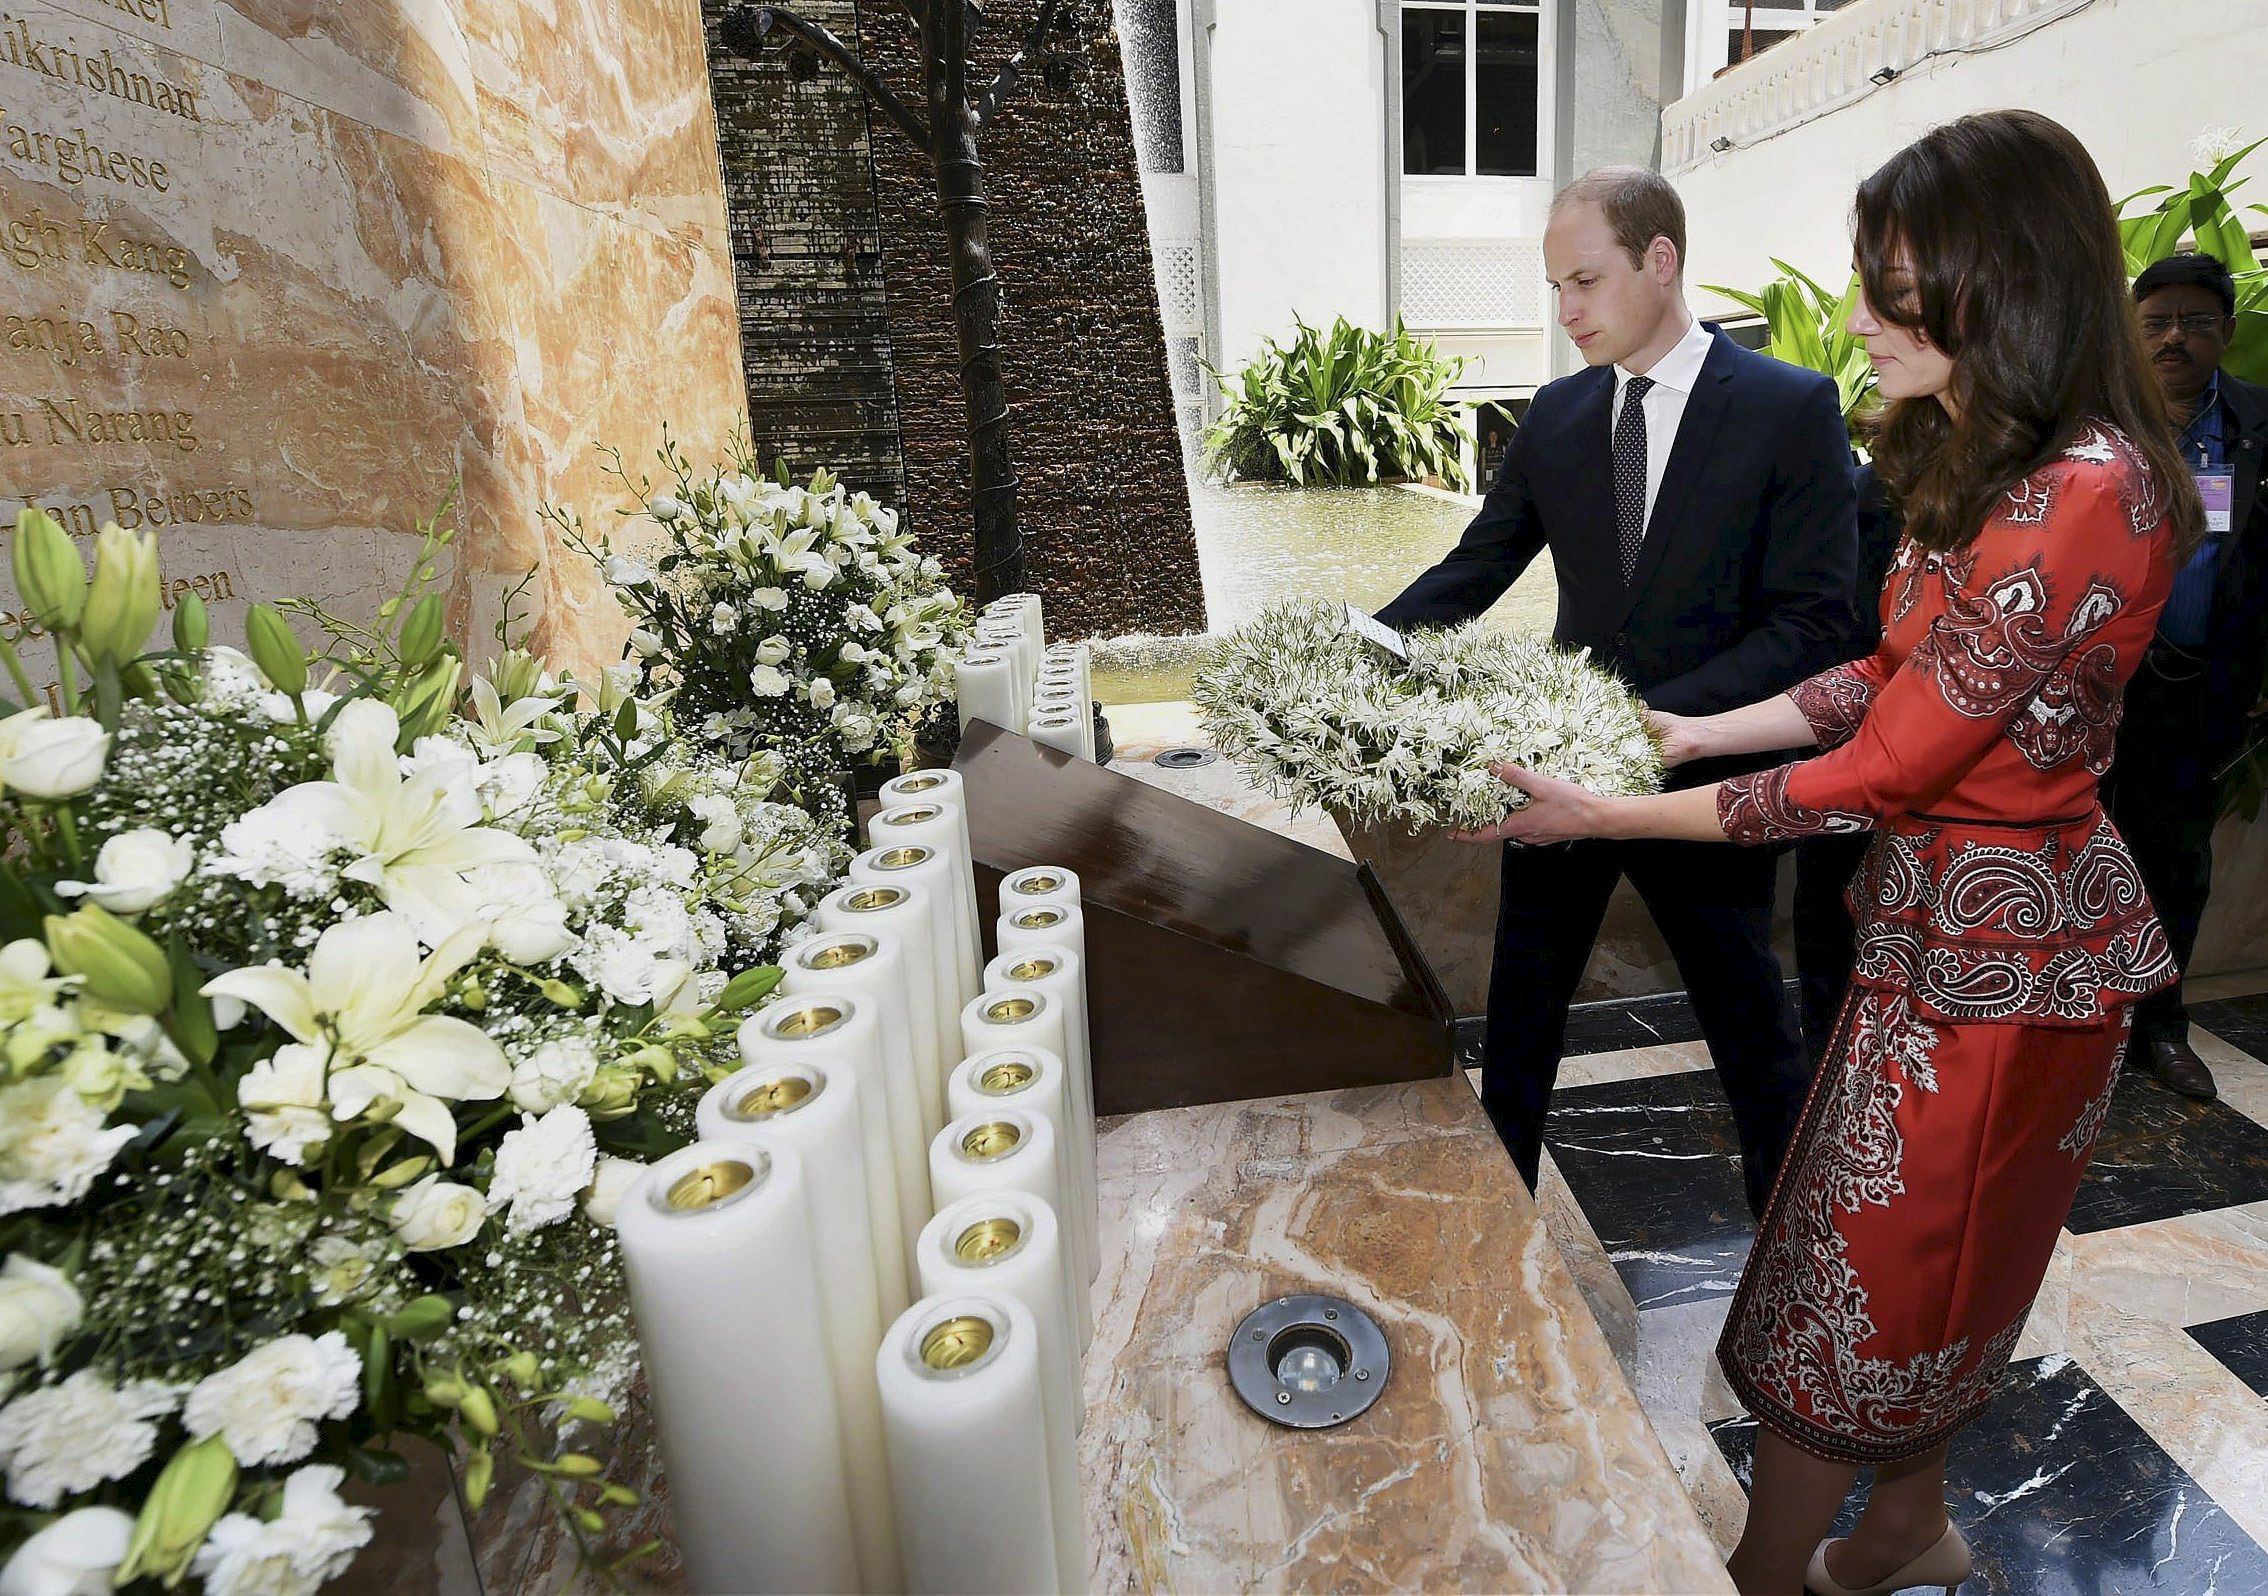 Prince William and Catherine, pay their respects at the 26/11 memorial